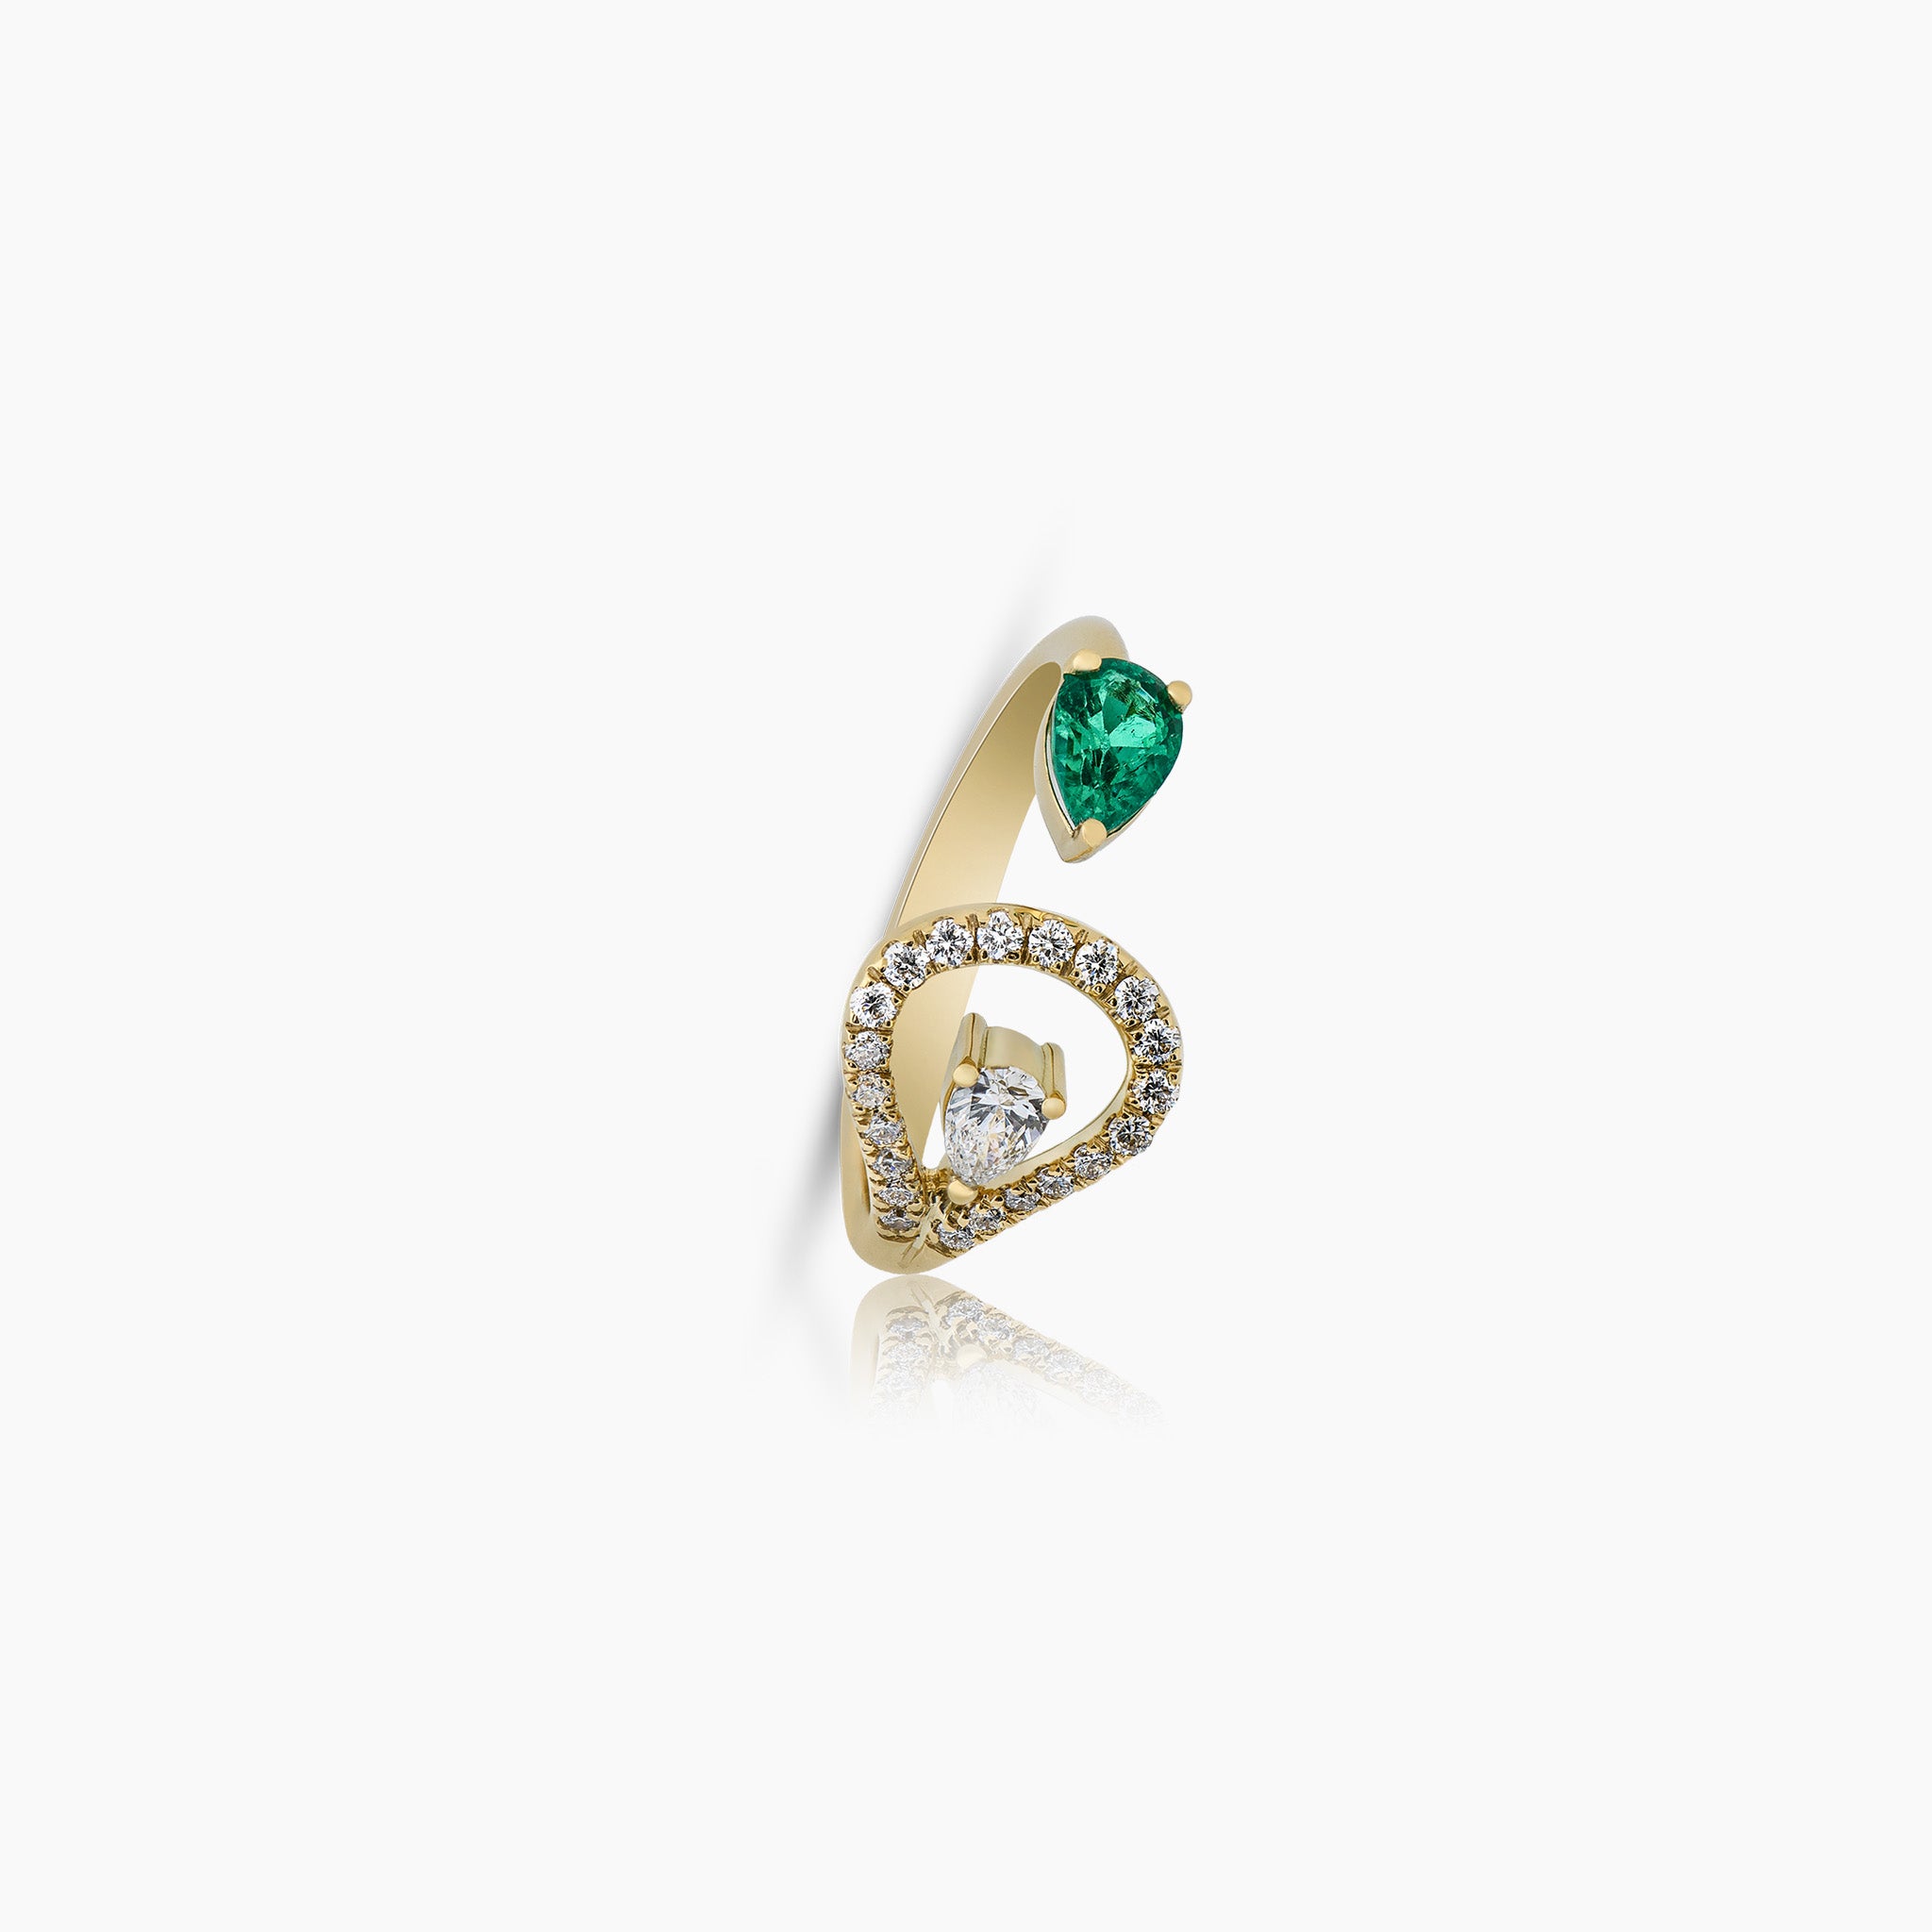 A stunning ring adorned with a vibrant emerald and dazzling diamonds, set against an off-white background.